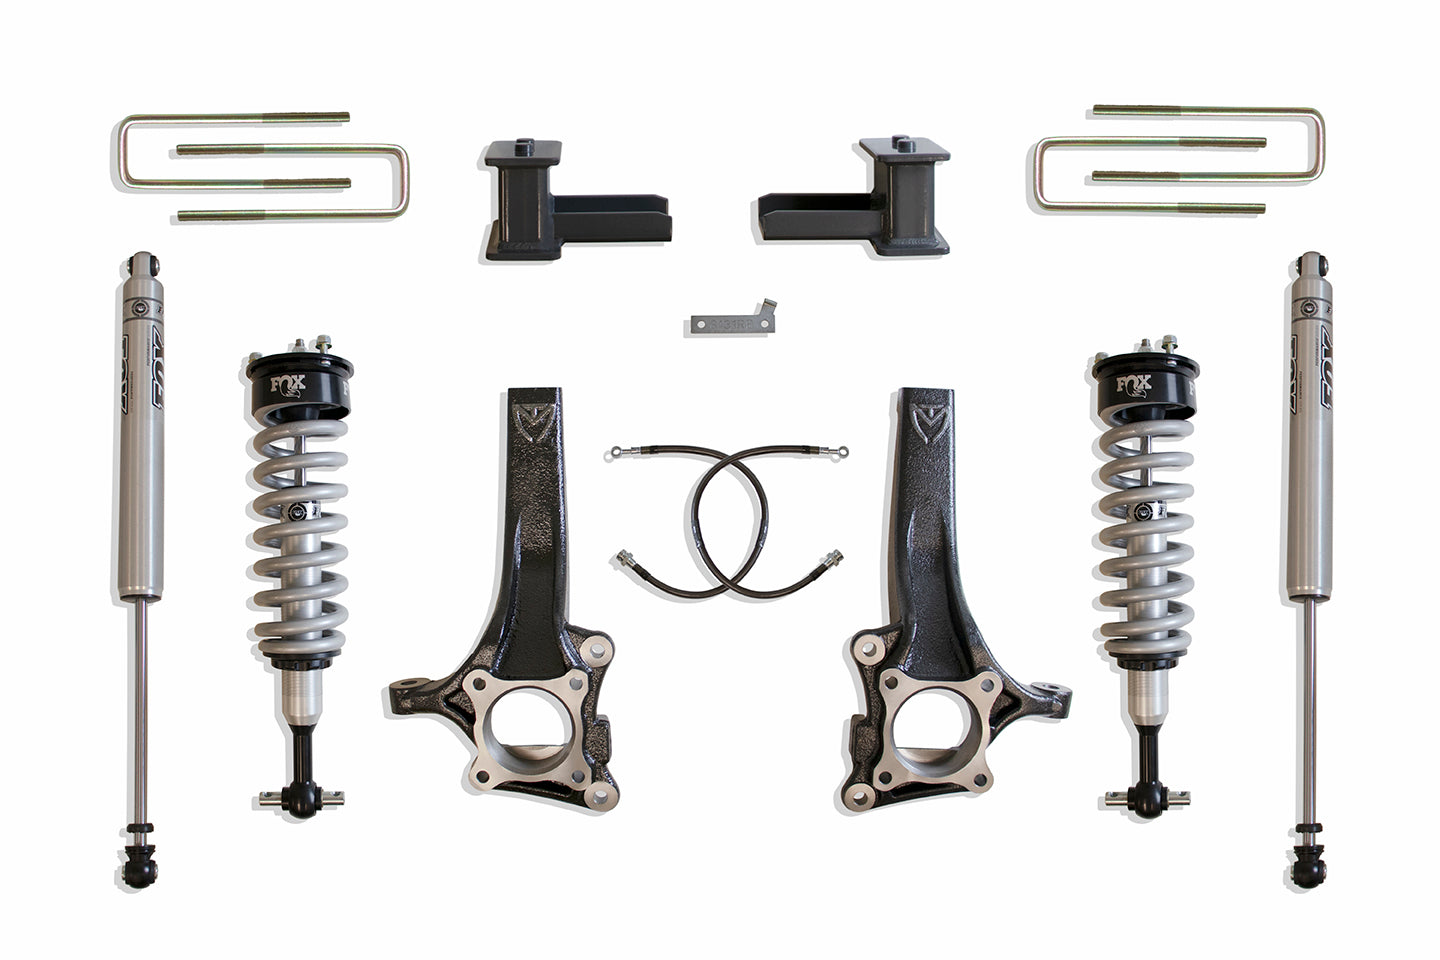 MaxTrac Suspension 2WD 7" Lift Kit Including Fox 2.0 Performance Series Coil Overs Spindles Extended Brake Lines Blocks U-Bolts & Rear Shocks K883274F